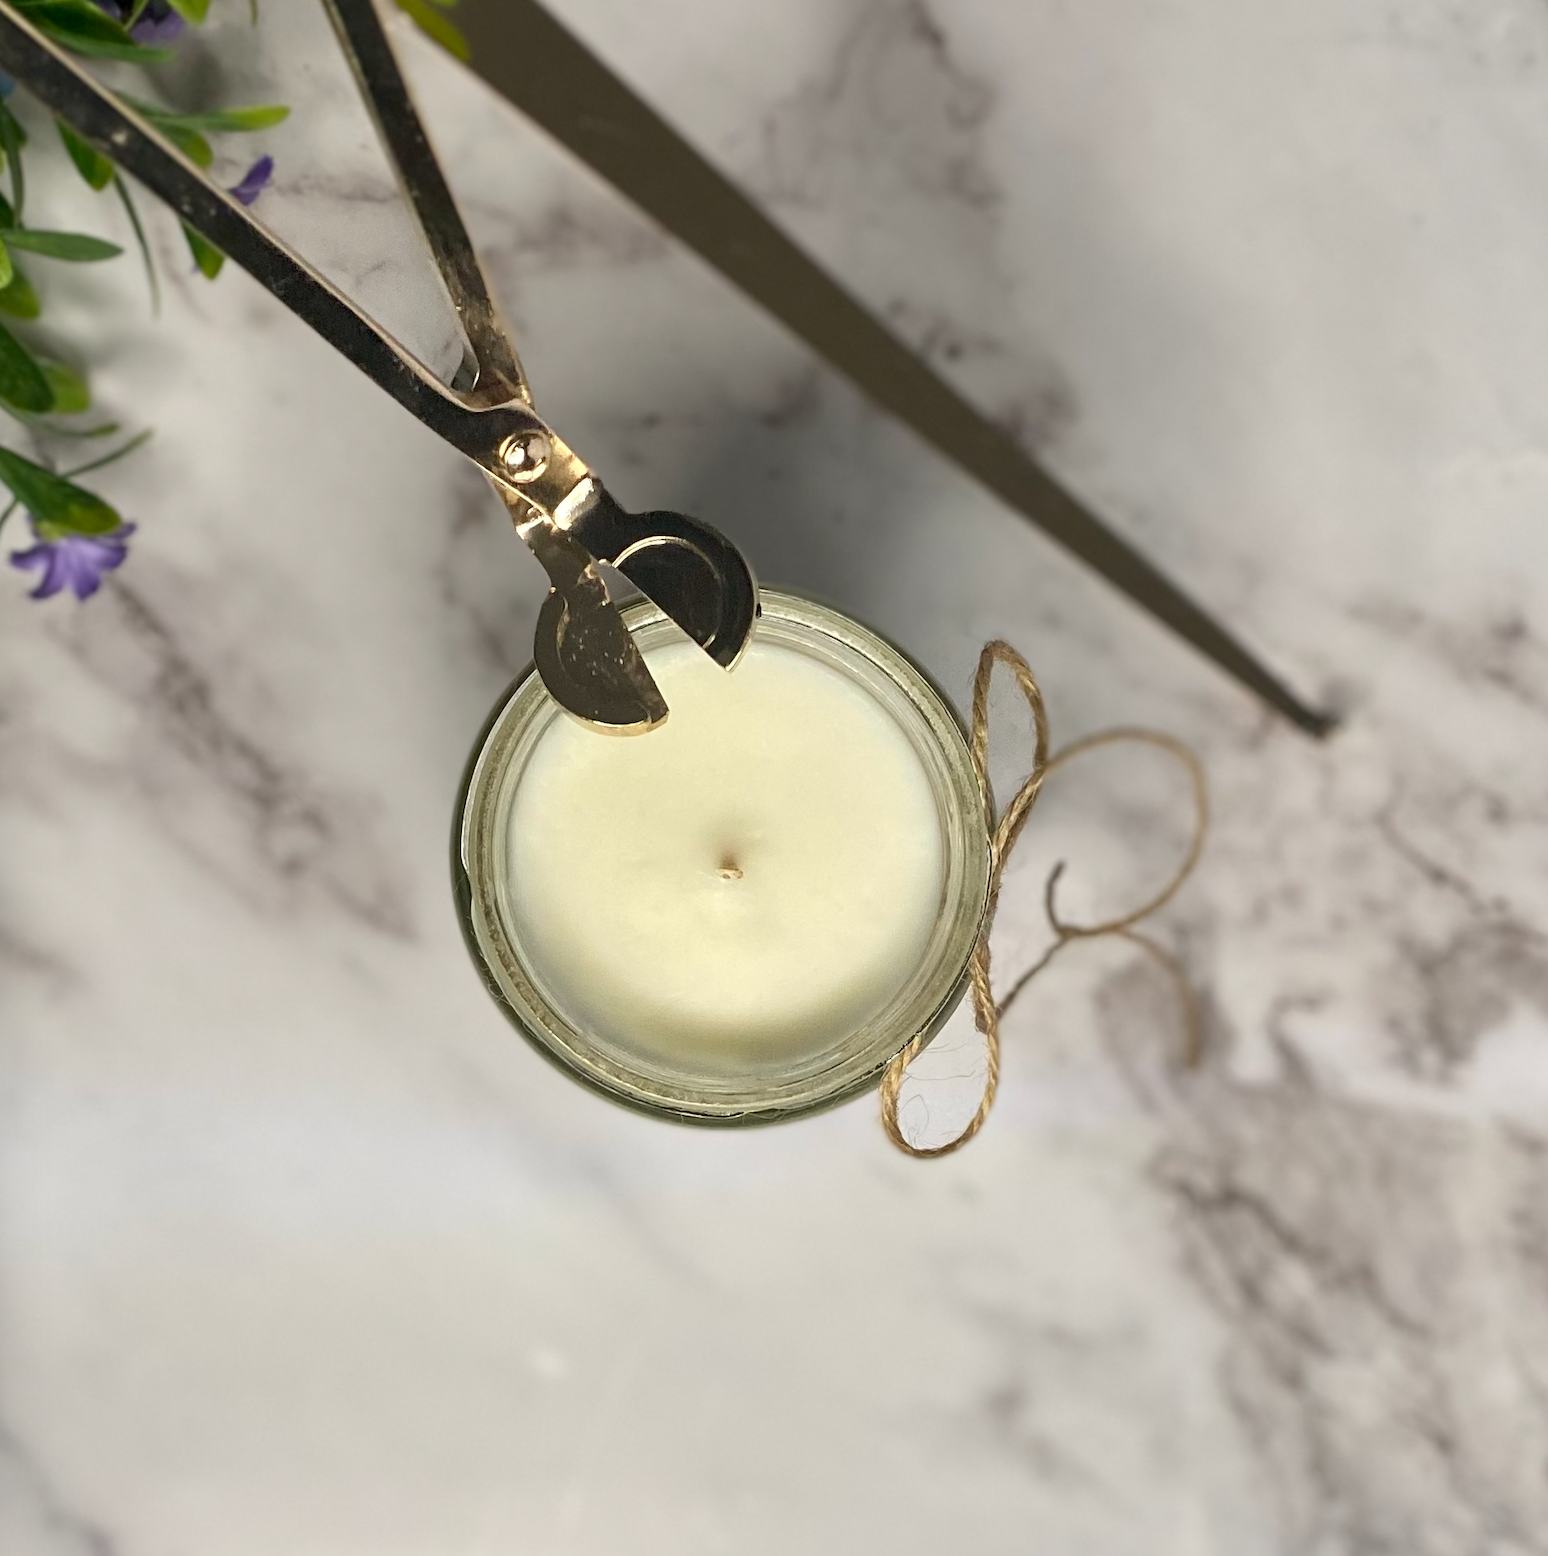 Sweet Pea & Rose Scented Soy Wax Candle - Lanji Candles